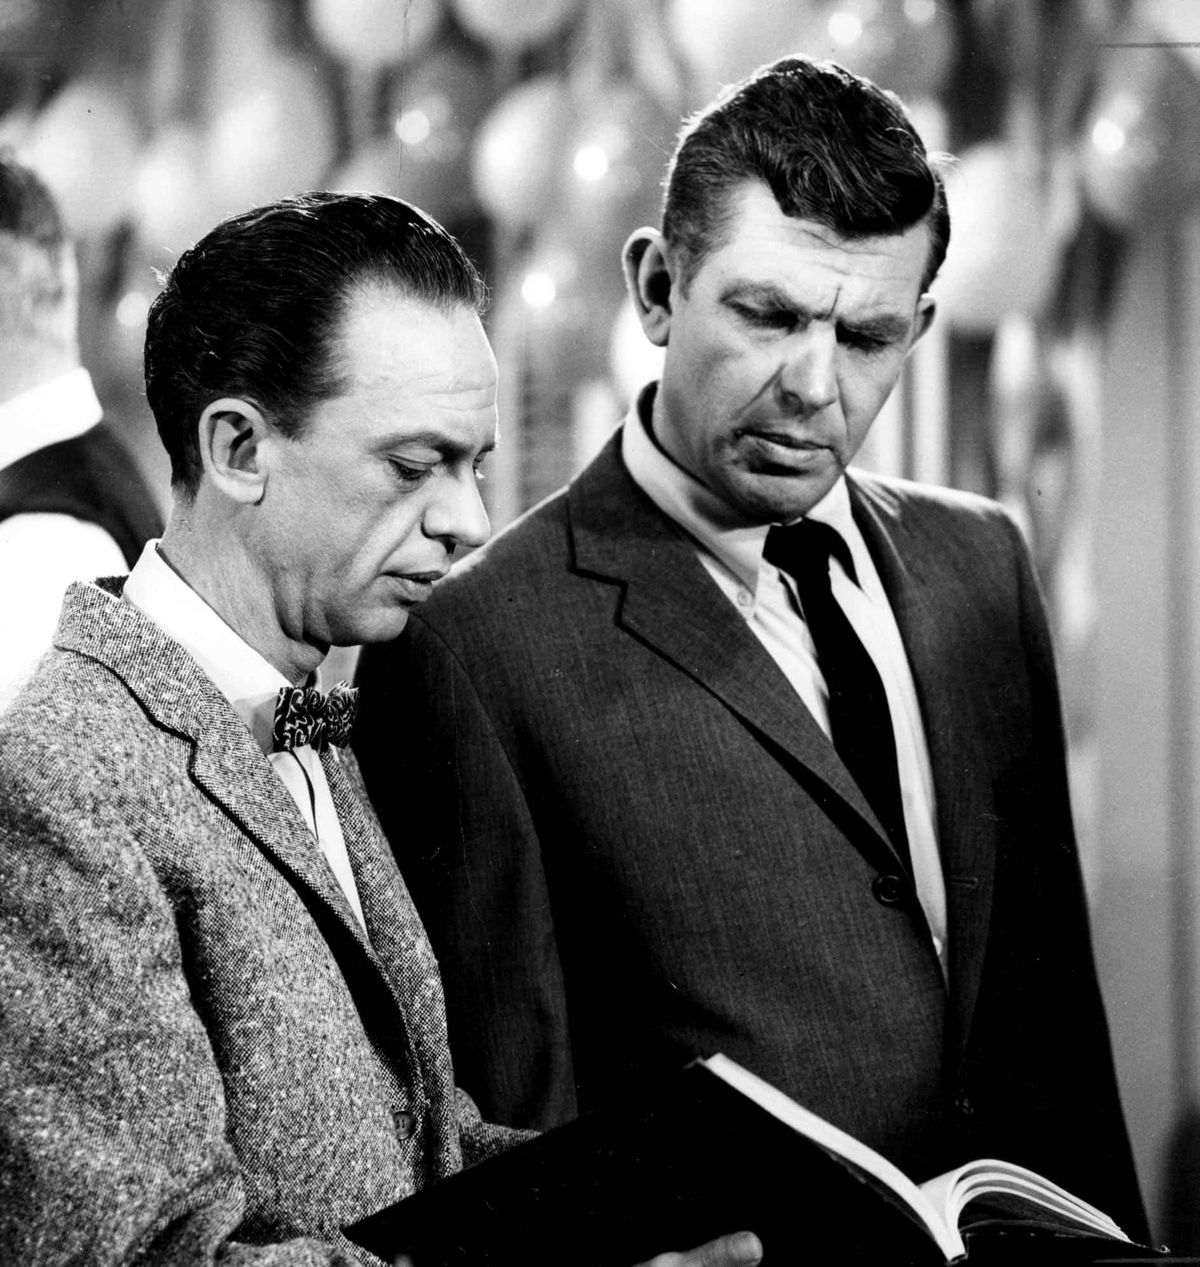 don knotts andy Griffith